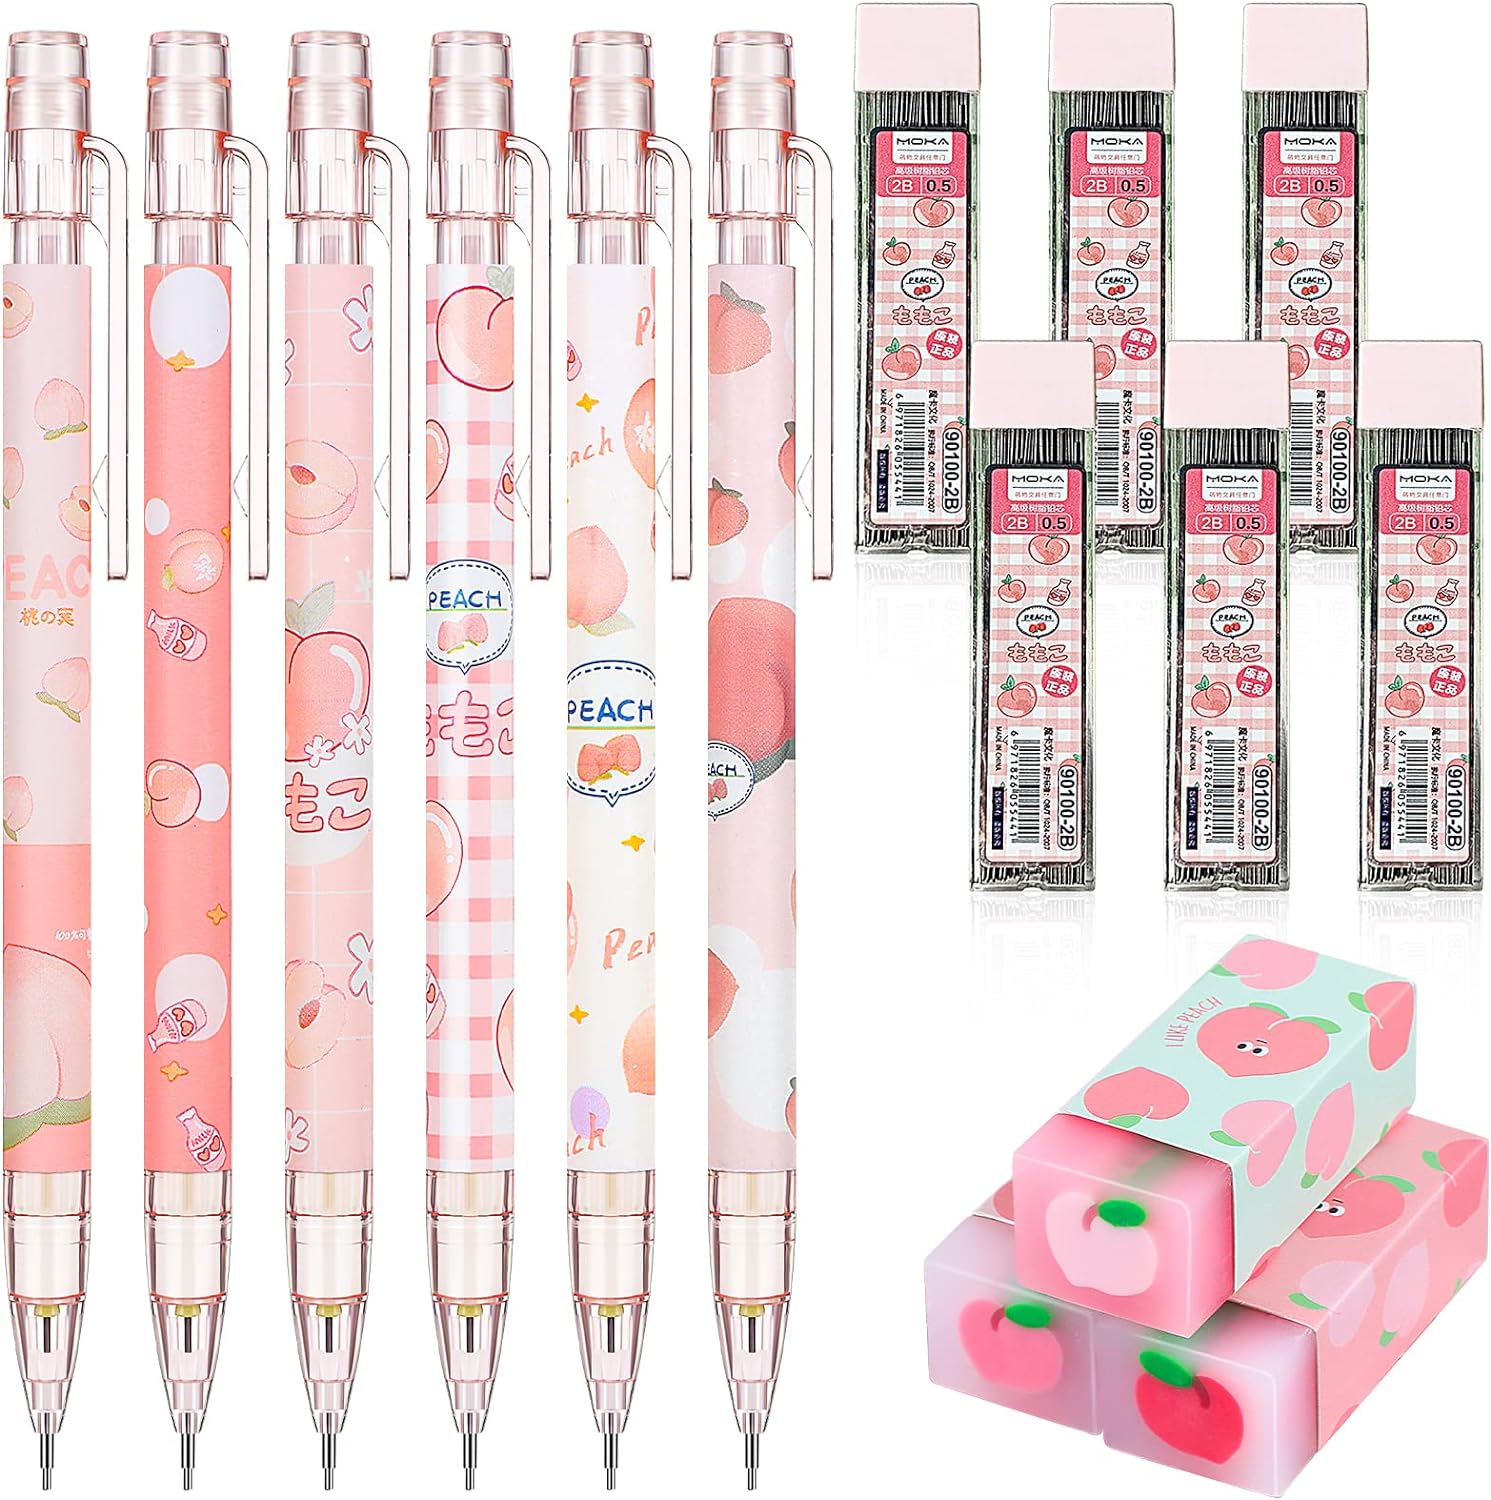 15pcs Peach Mechanical Pencils with 0.5mm Pencil Refills and Erasers